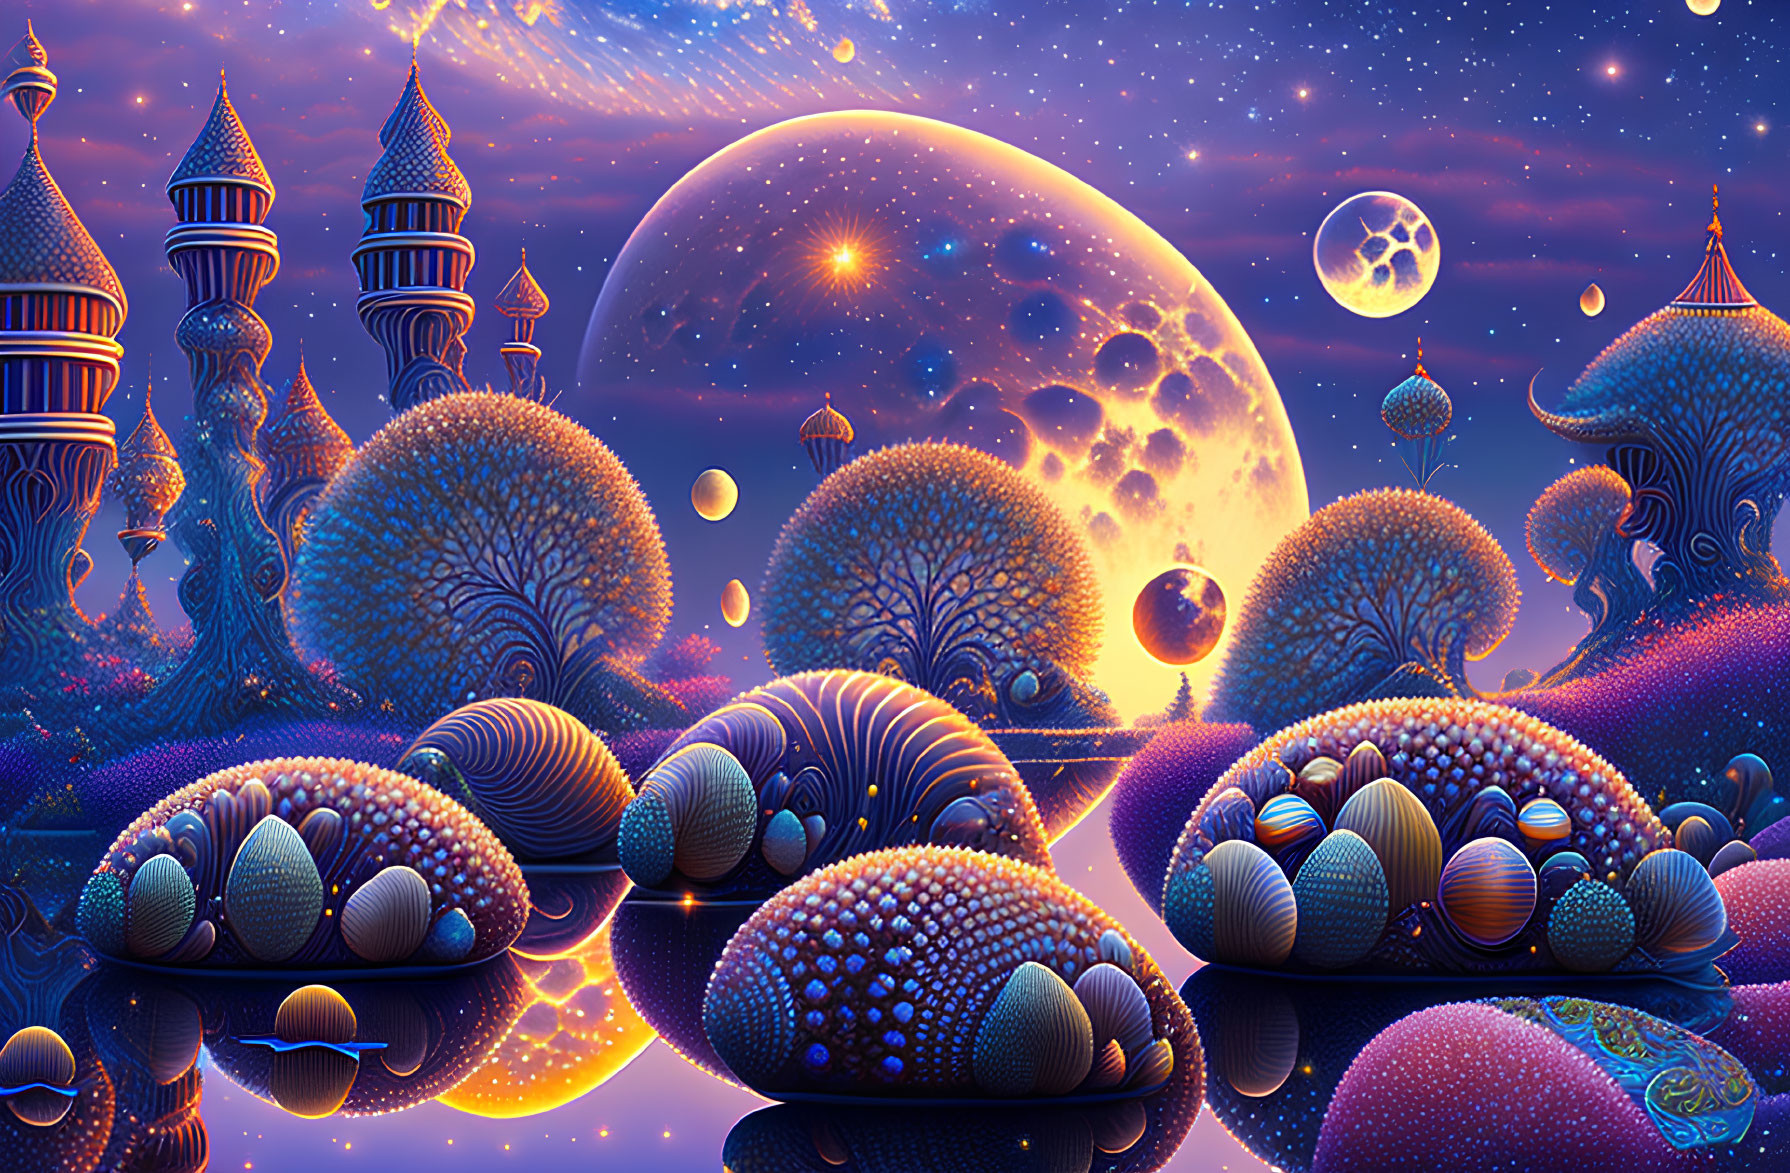 Colorful whimsical landscape with moon, trees, and water under starry sky